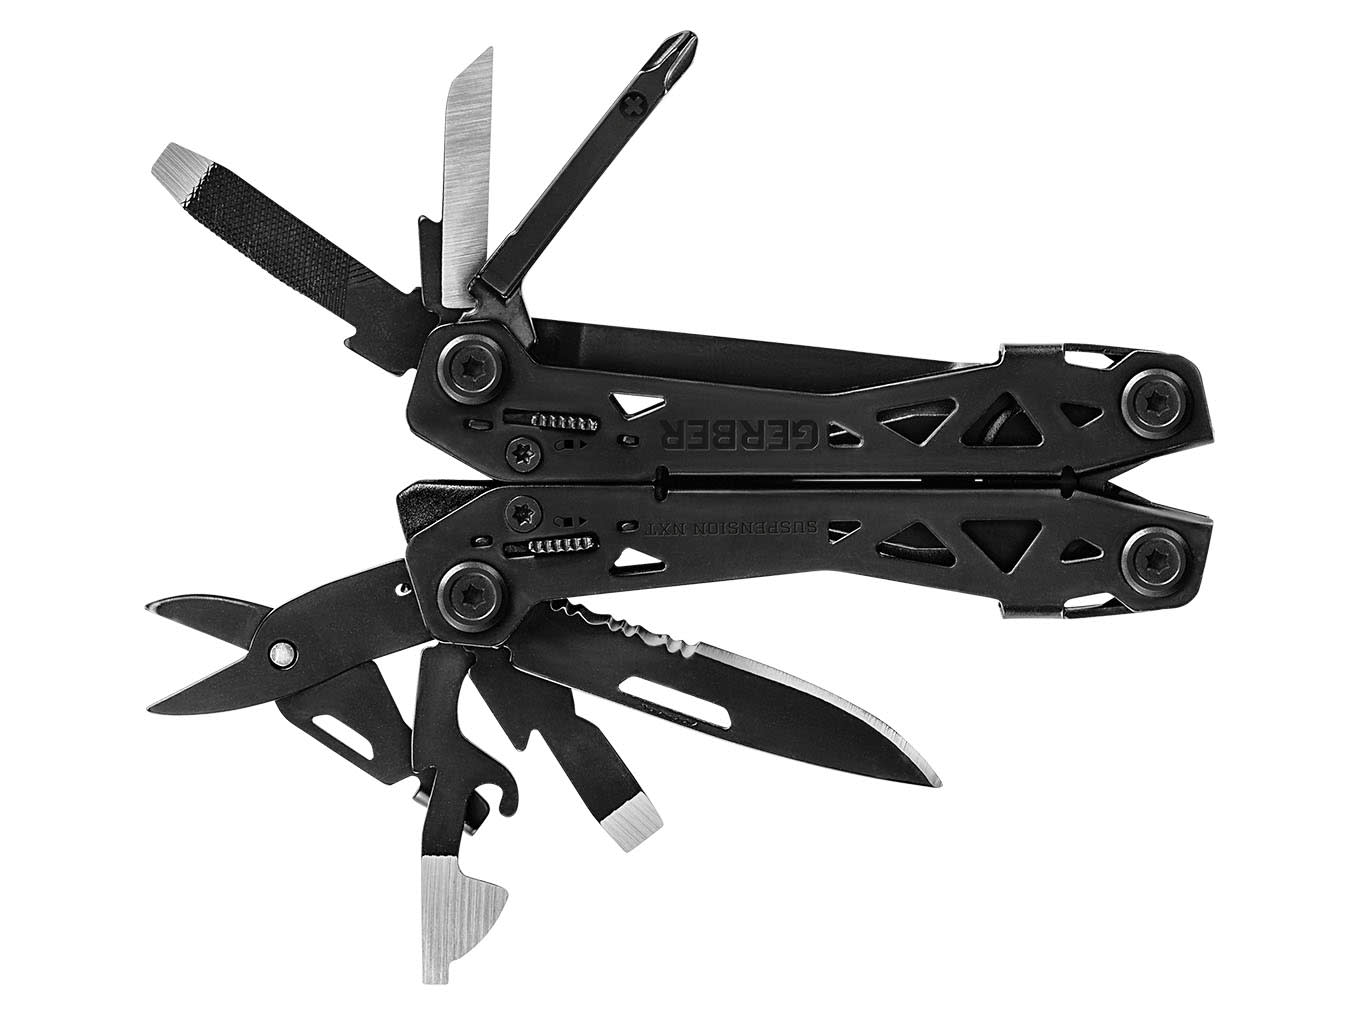 Gerber® Suspension NXT Folding Knife and Paraframe Multi-tool Combo